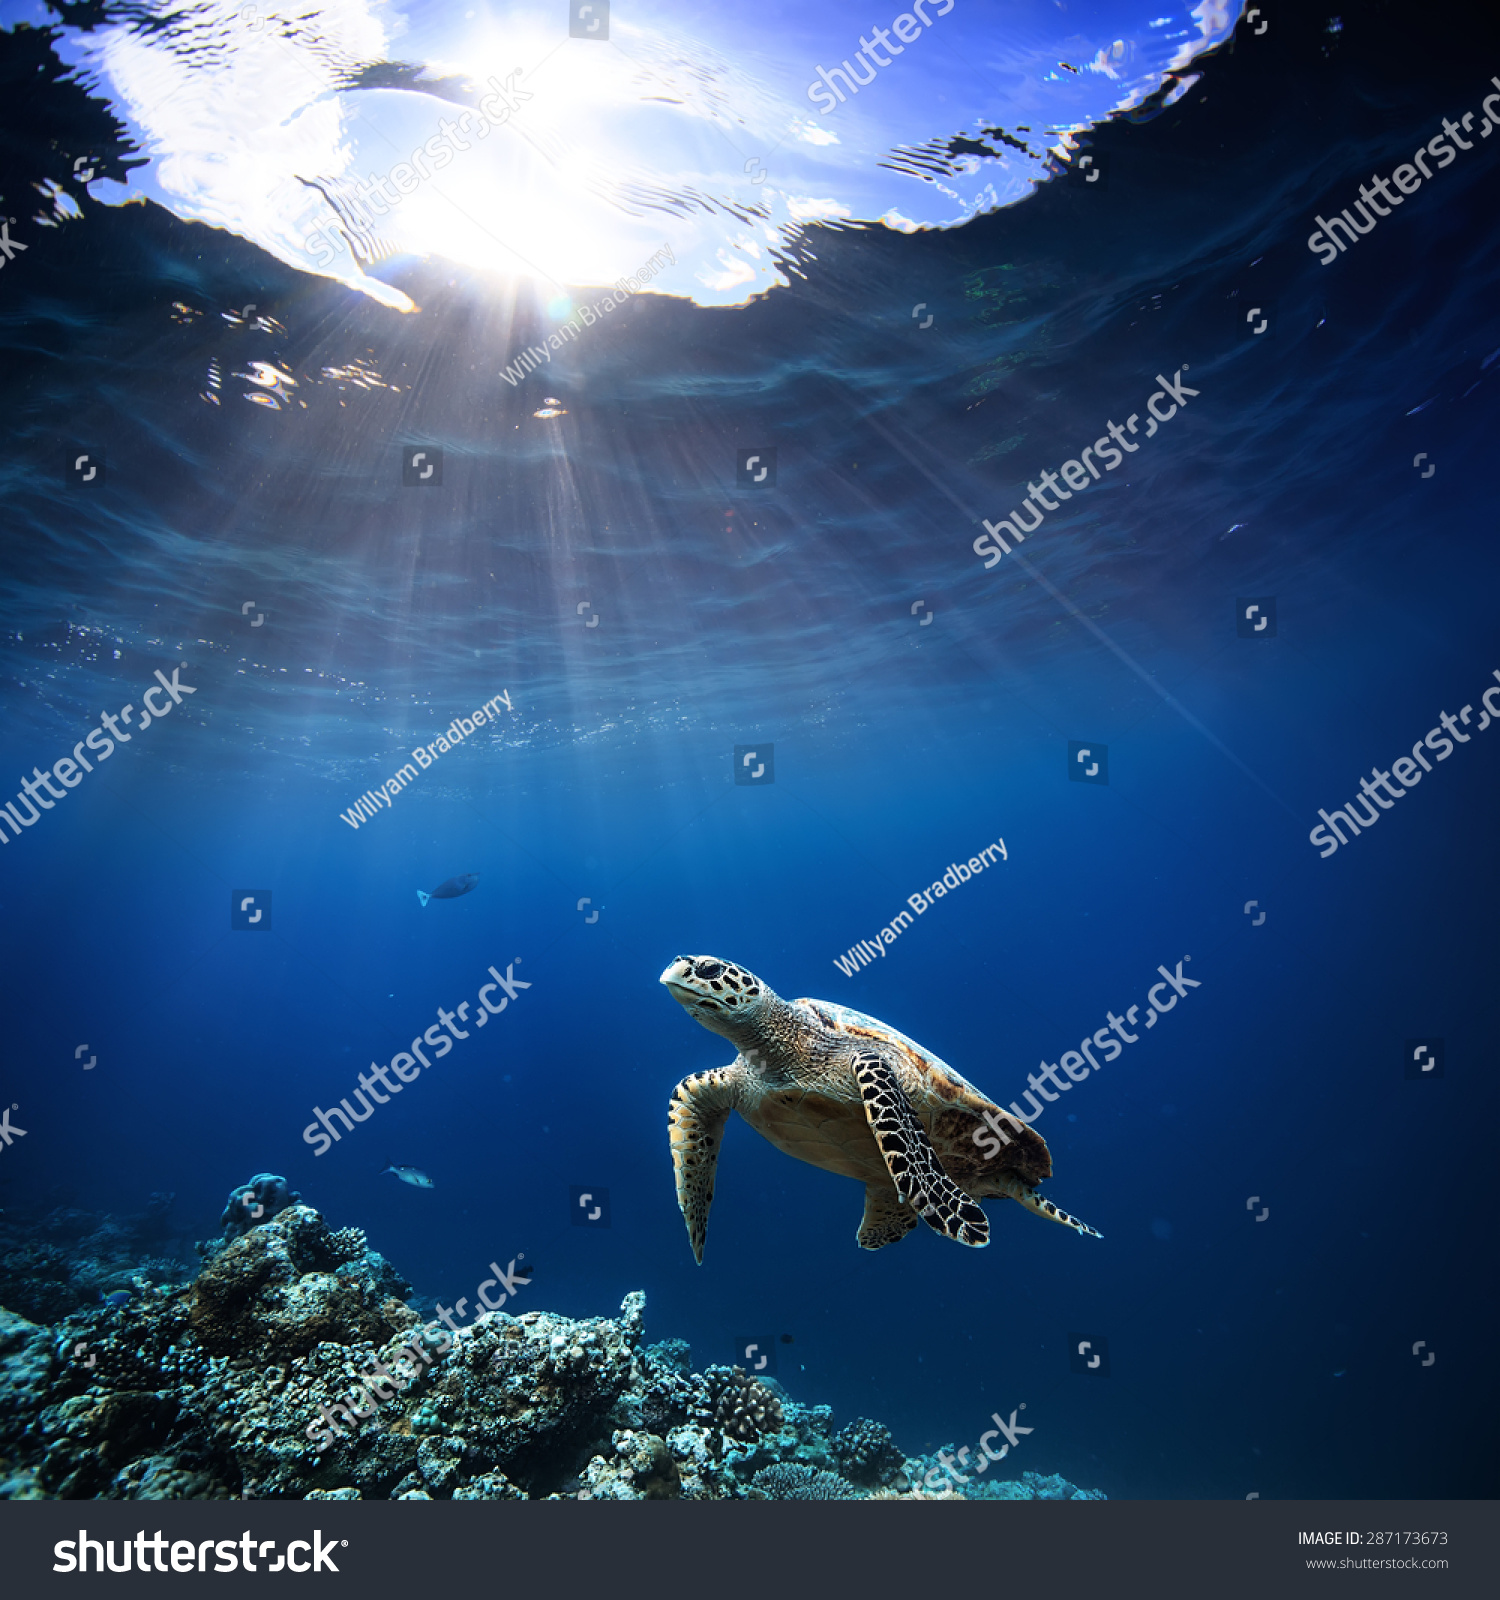 Underwater wildlife with animals, Divers adventures in Maldives. Sea turtle floating over beautiful natural ocean background. Coral reef lit with sunlight trough water surface. #287173673